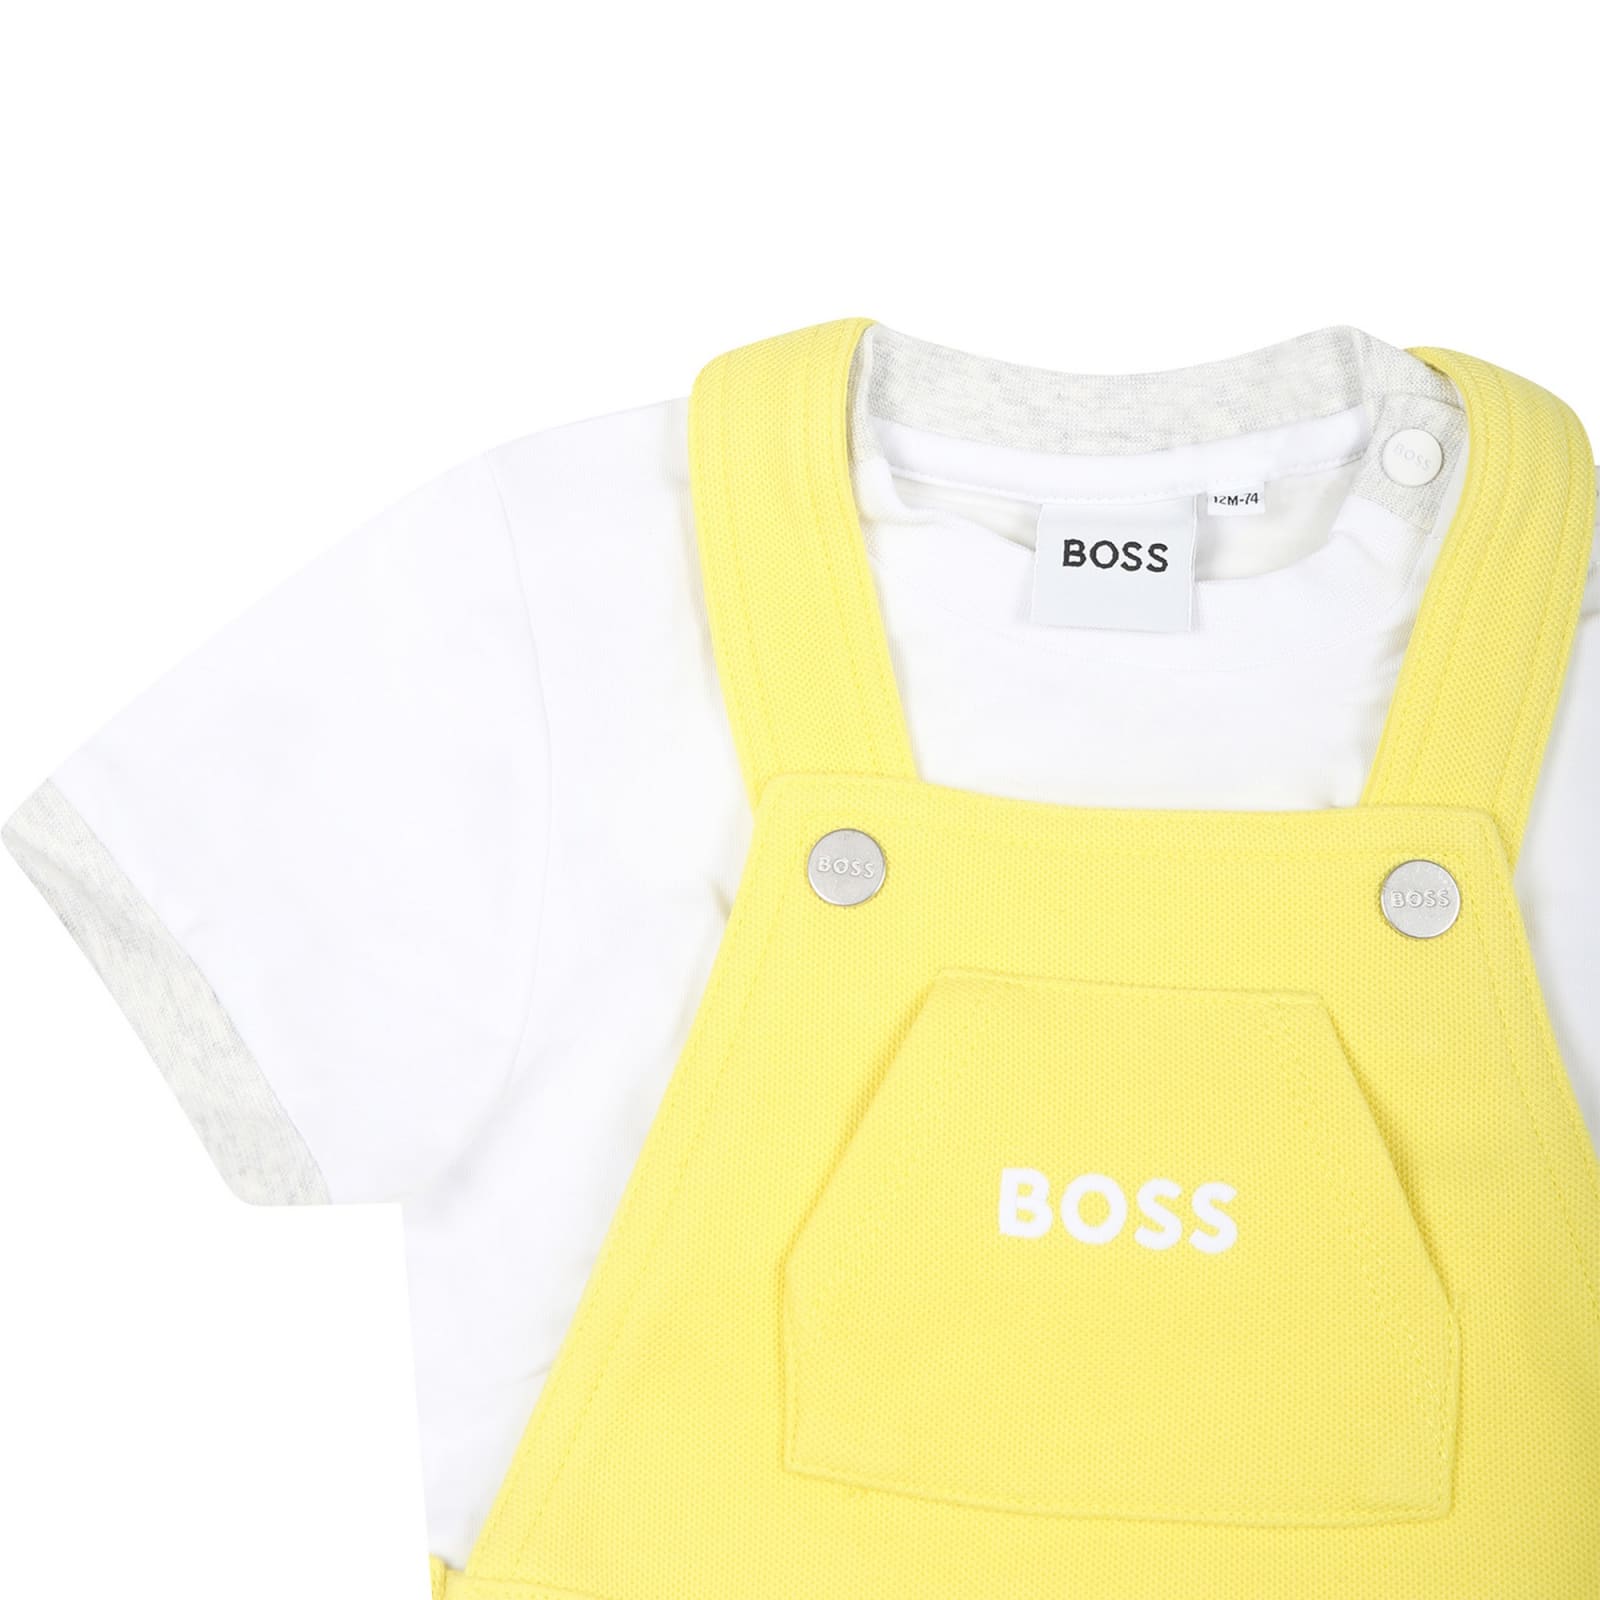 Shop Hugo Boss Yellow Suit For Baby Boy With Logo